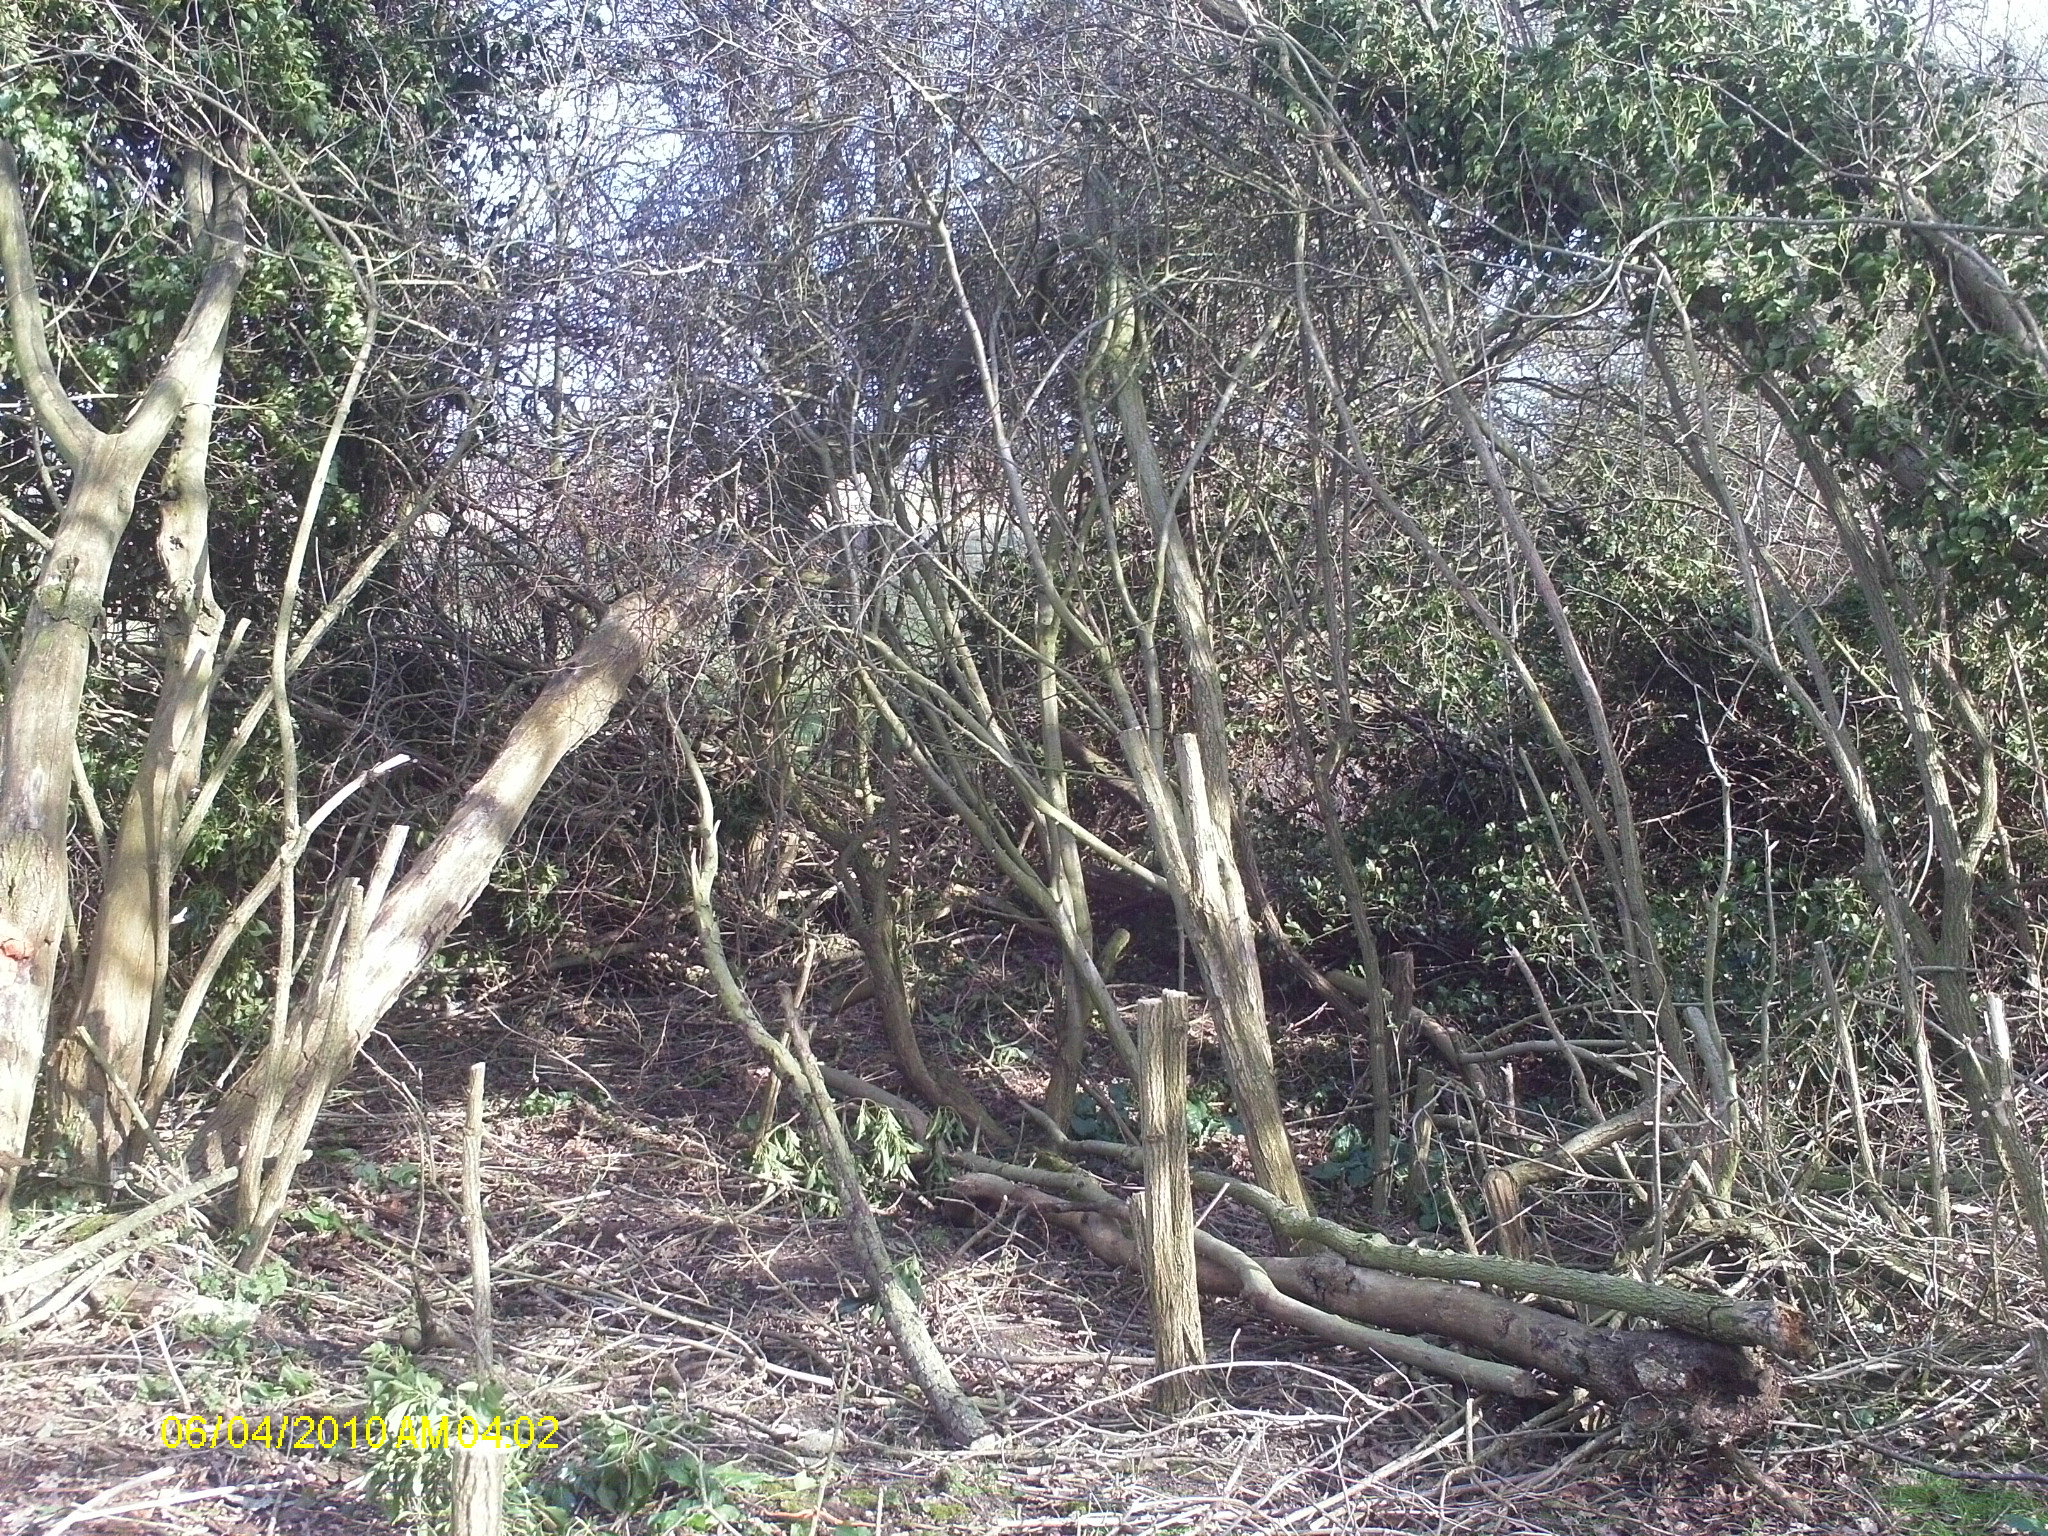 Dead trees, ivy and chainage